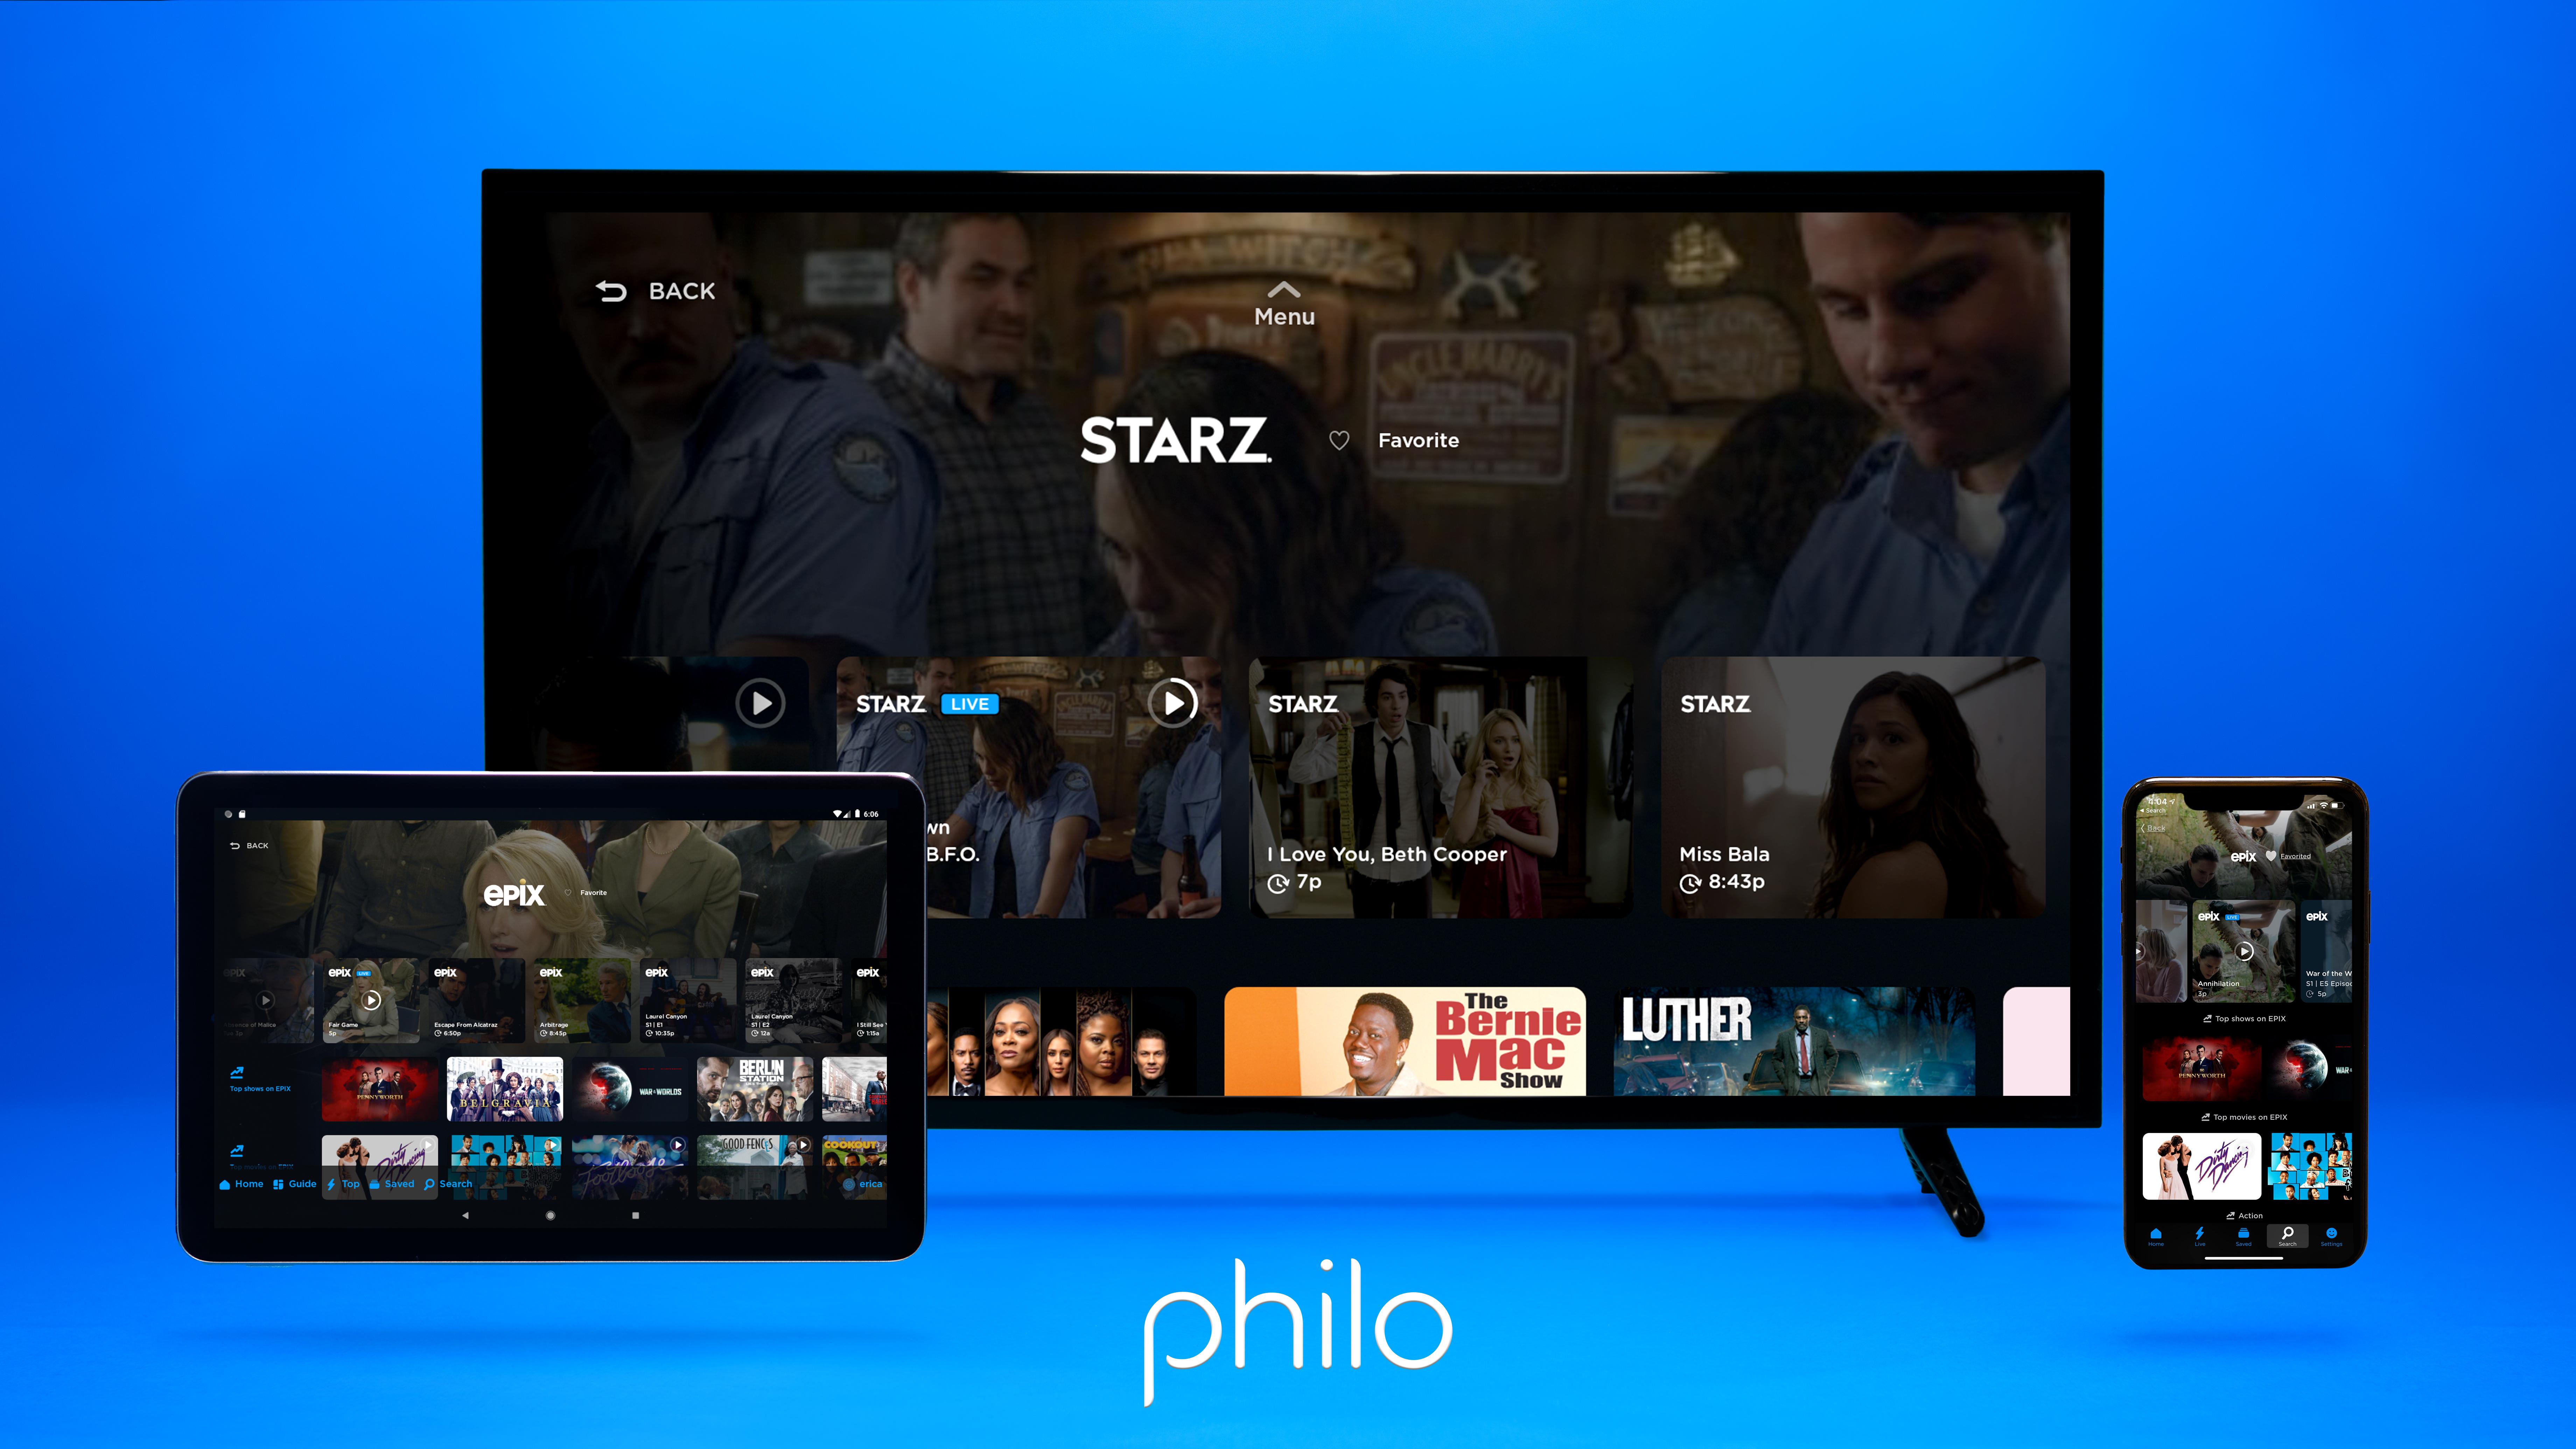 'Image of EPIX and STARZ channel profiles on TV, tablet, and iPhone against a blue background.'